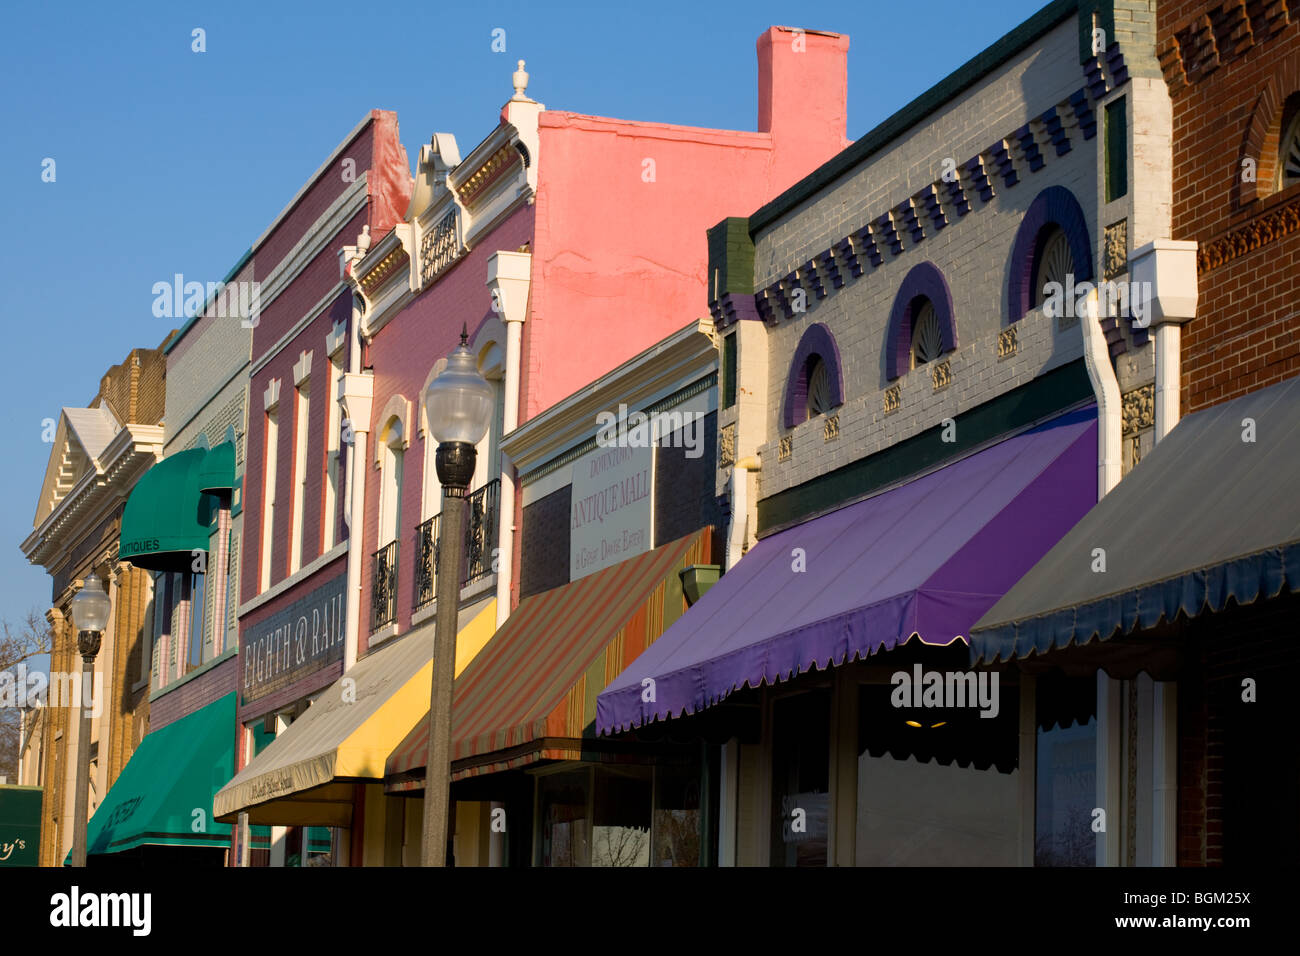 Colorful Awnings Stock Photos Colorful Awnings Stock Images Alamy